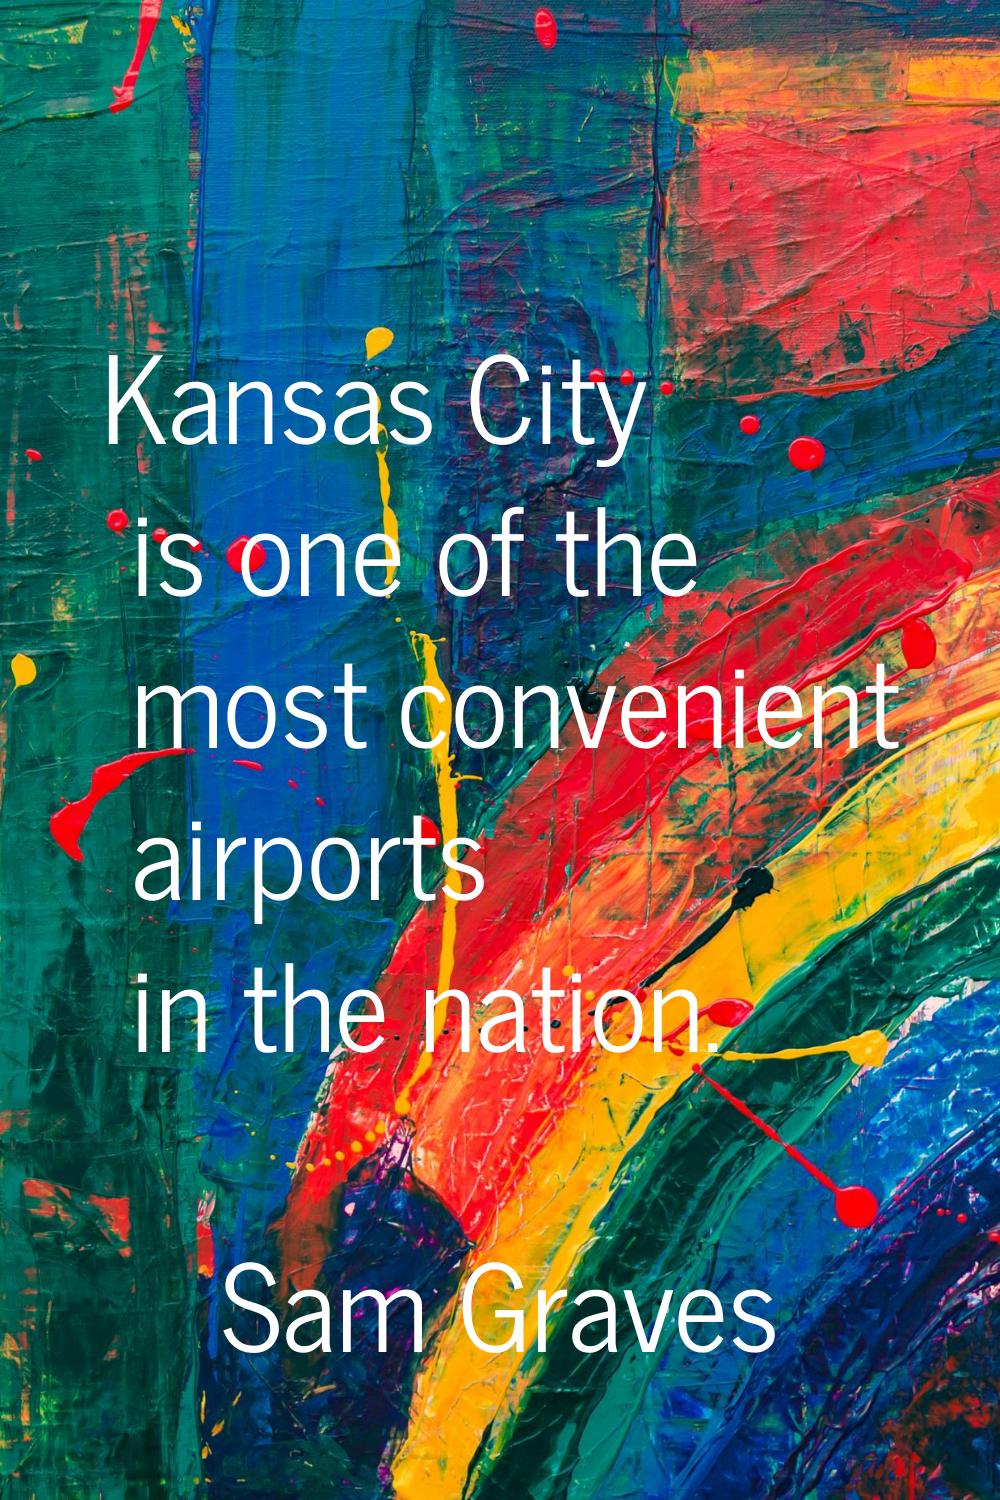 Kansas City is one of the most convenient airports in the nation.